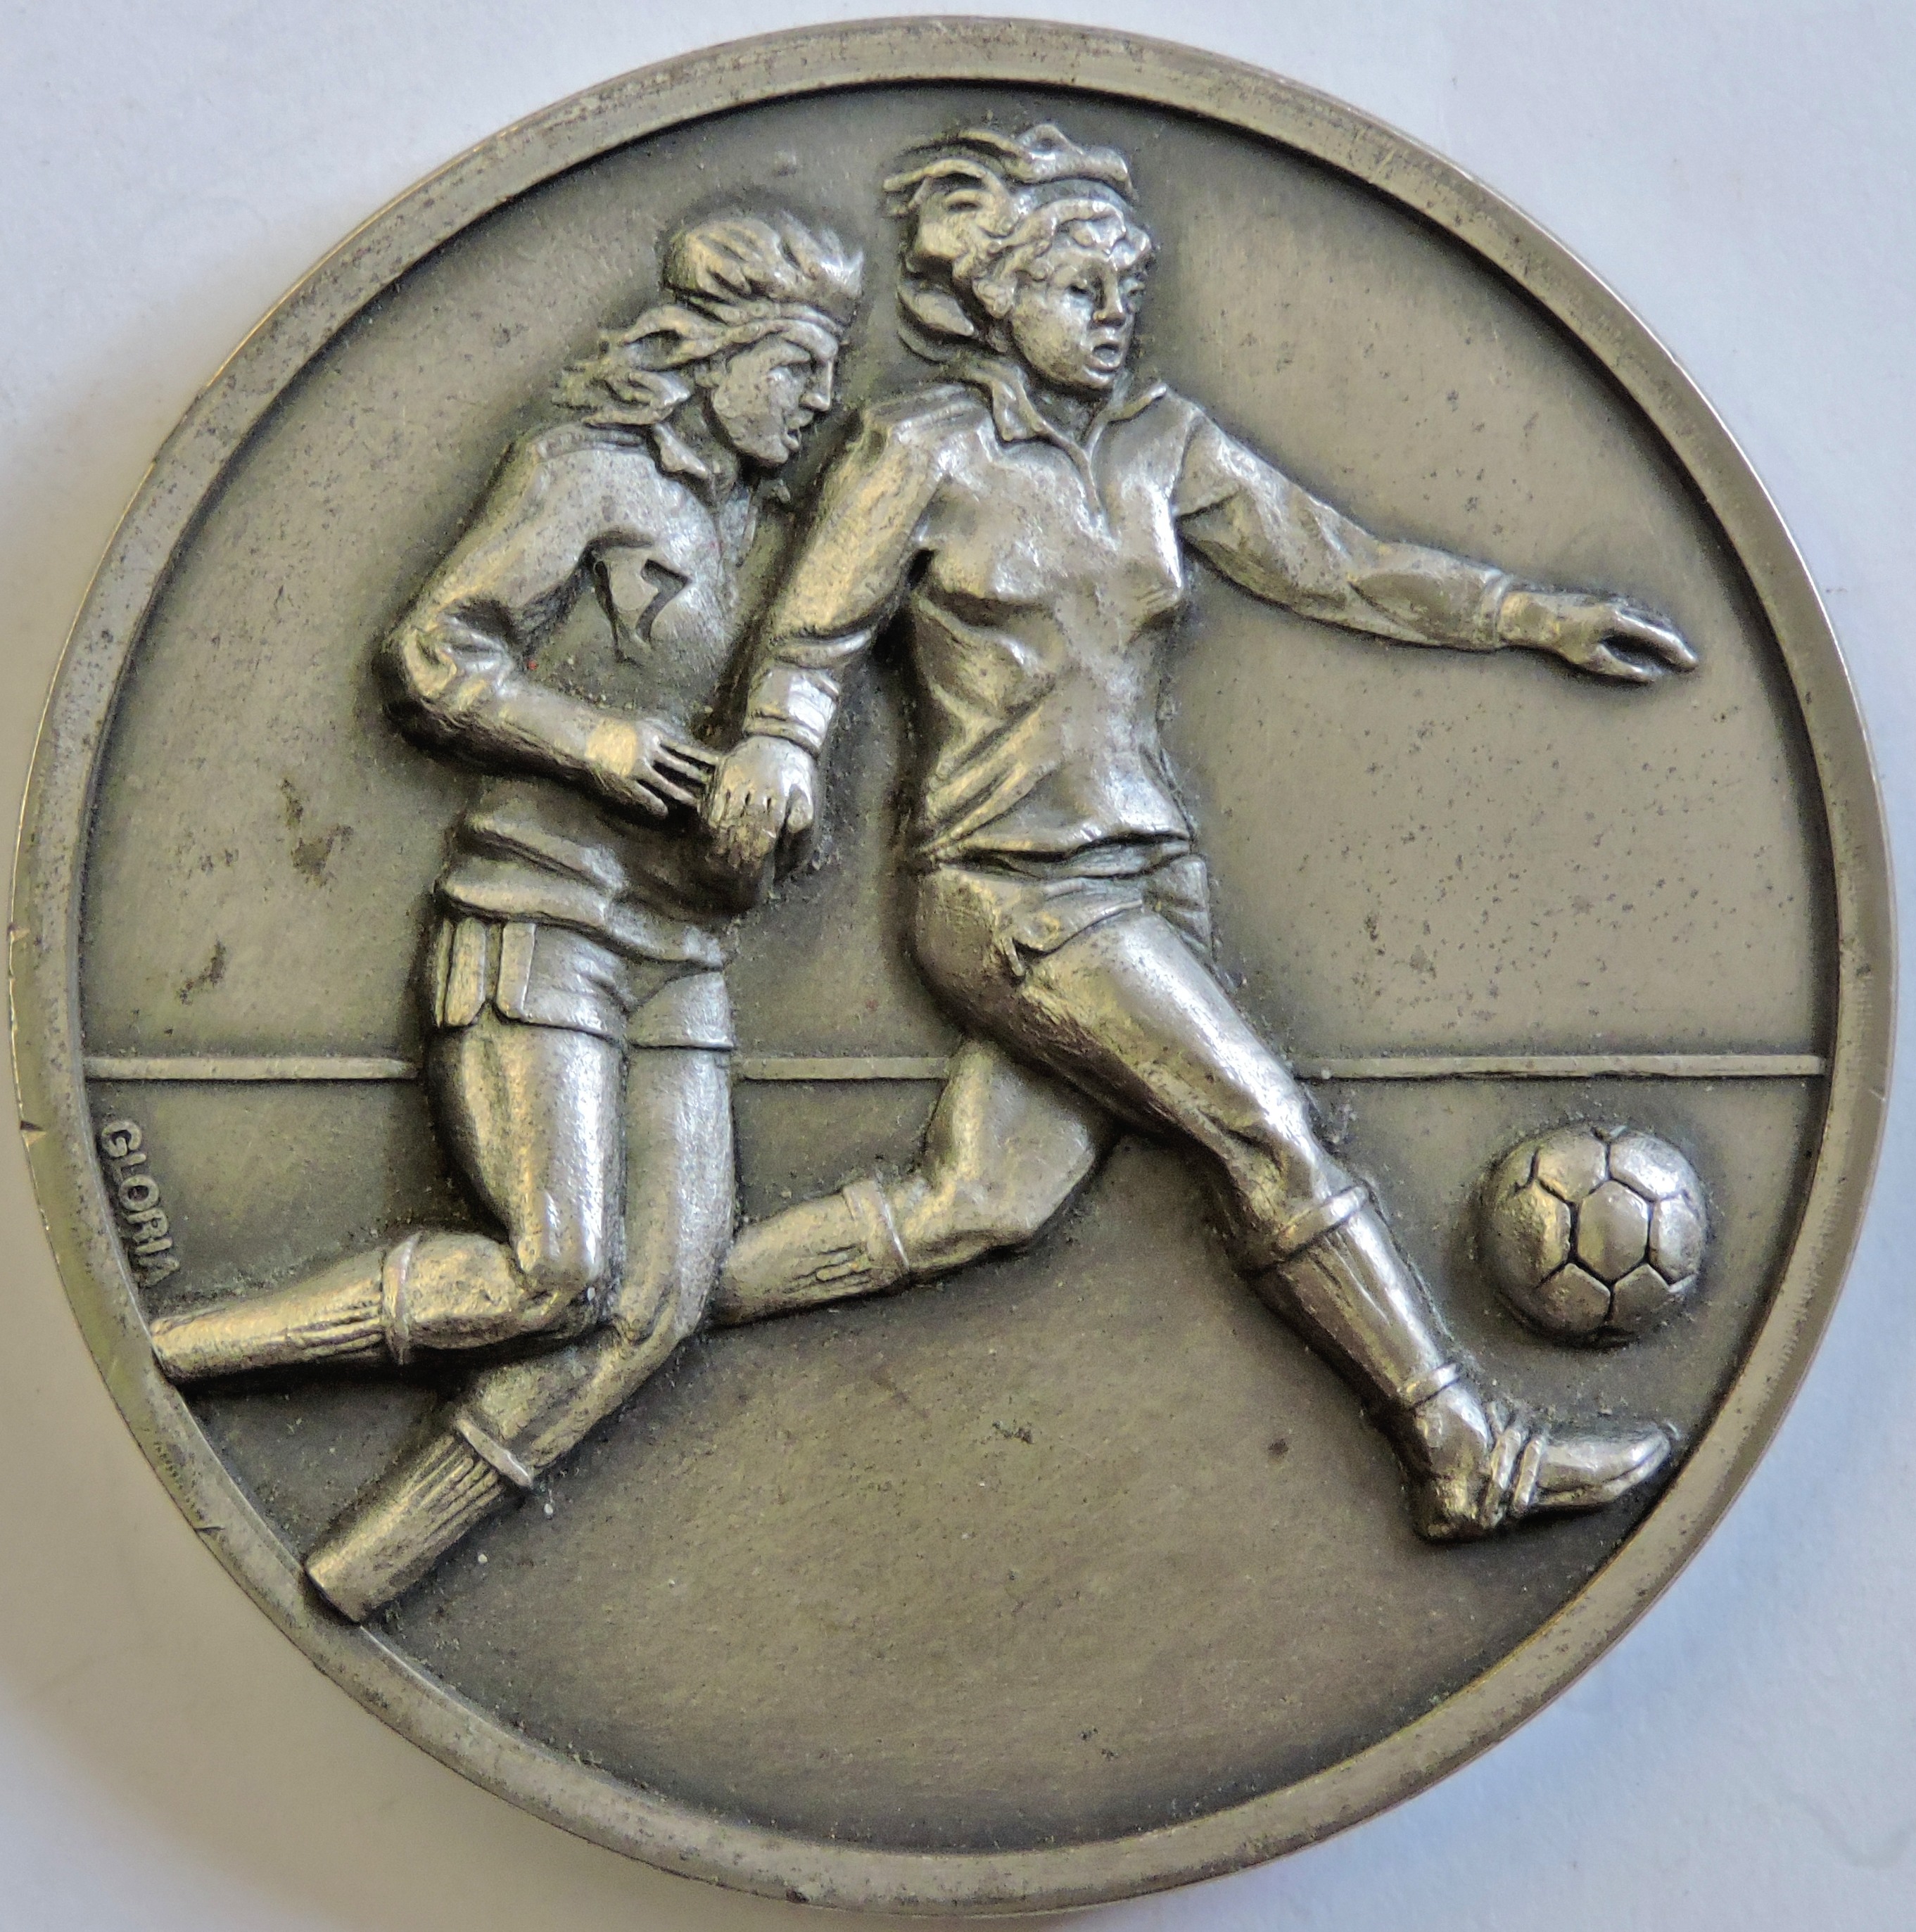 W.S. & R.C. Women's Football Large winners pewter 68mm, engraved, an early Women's Football Medal. - Image 2 of 3